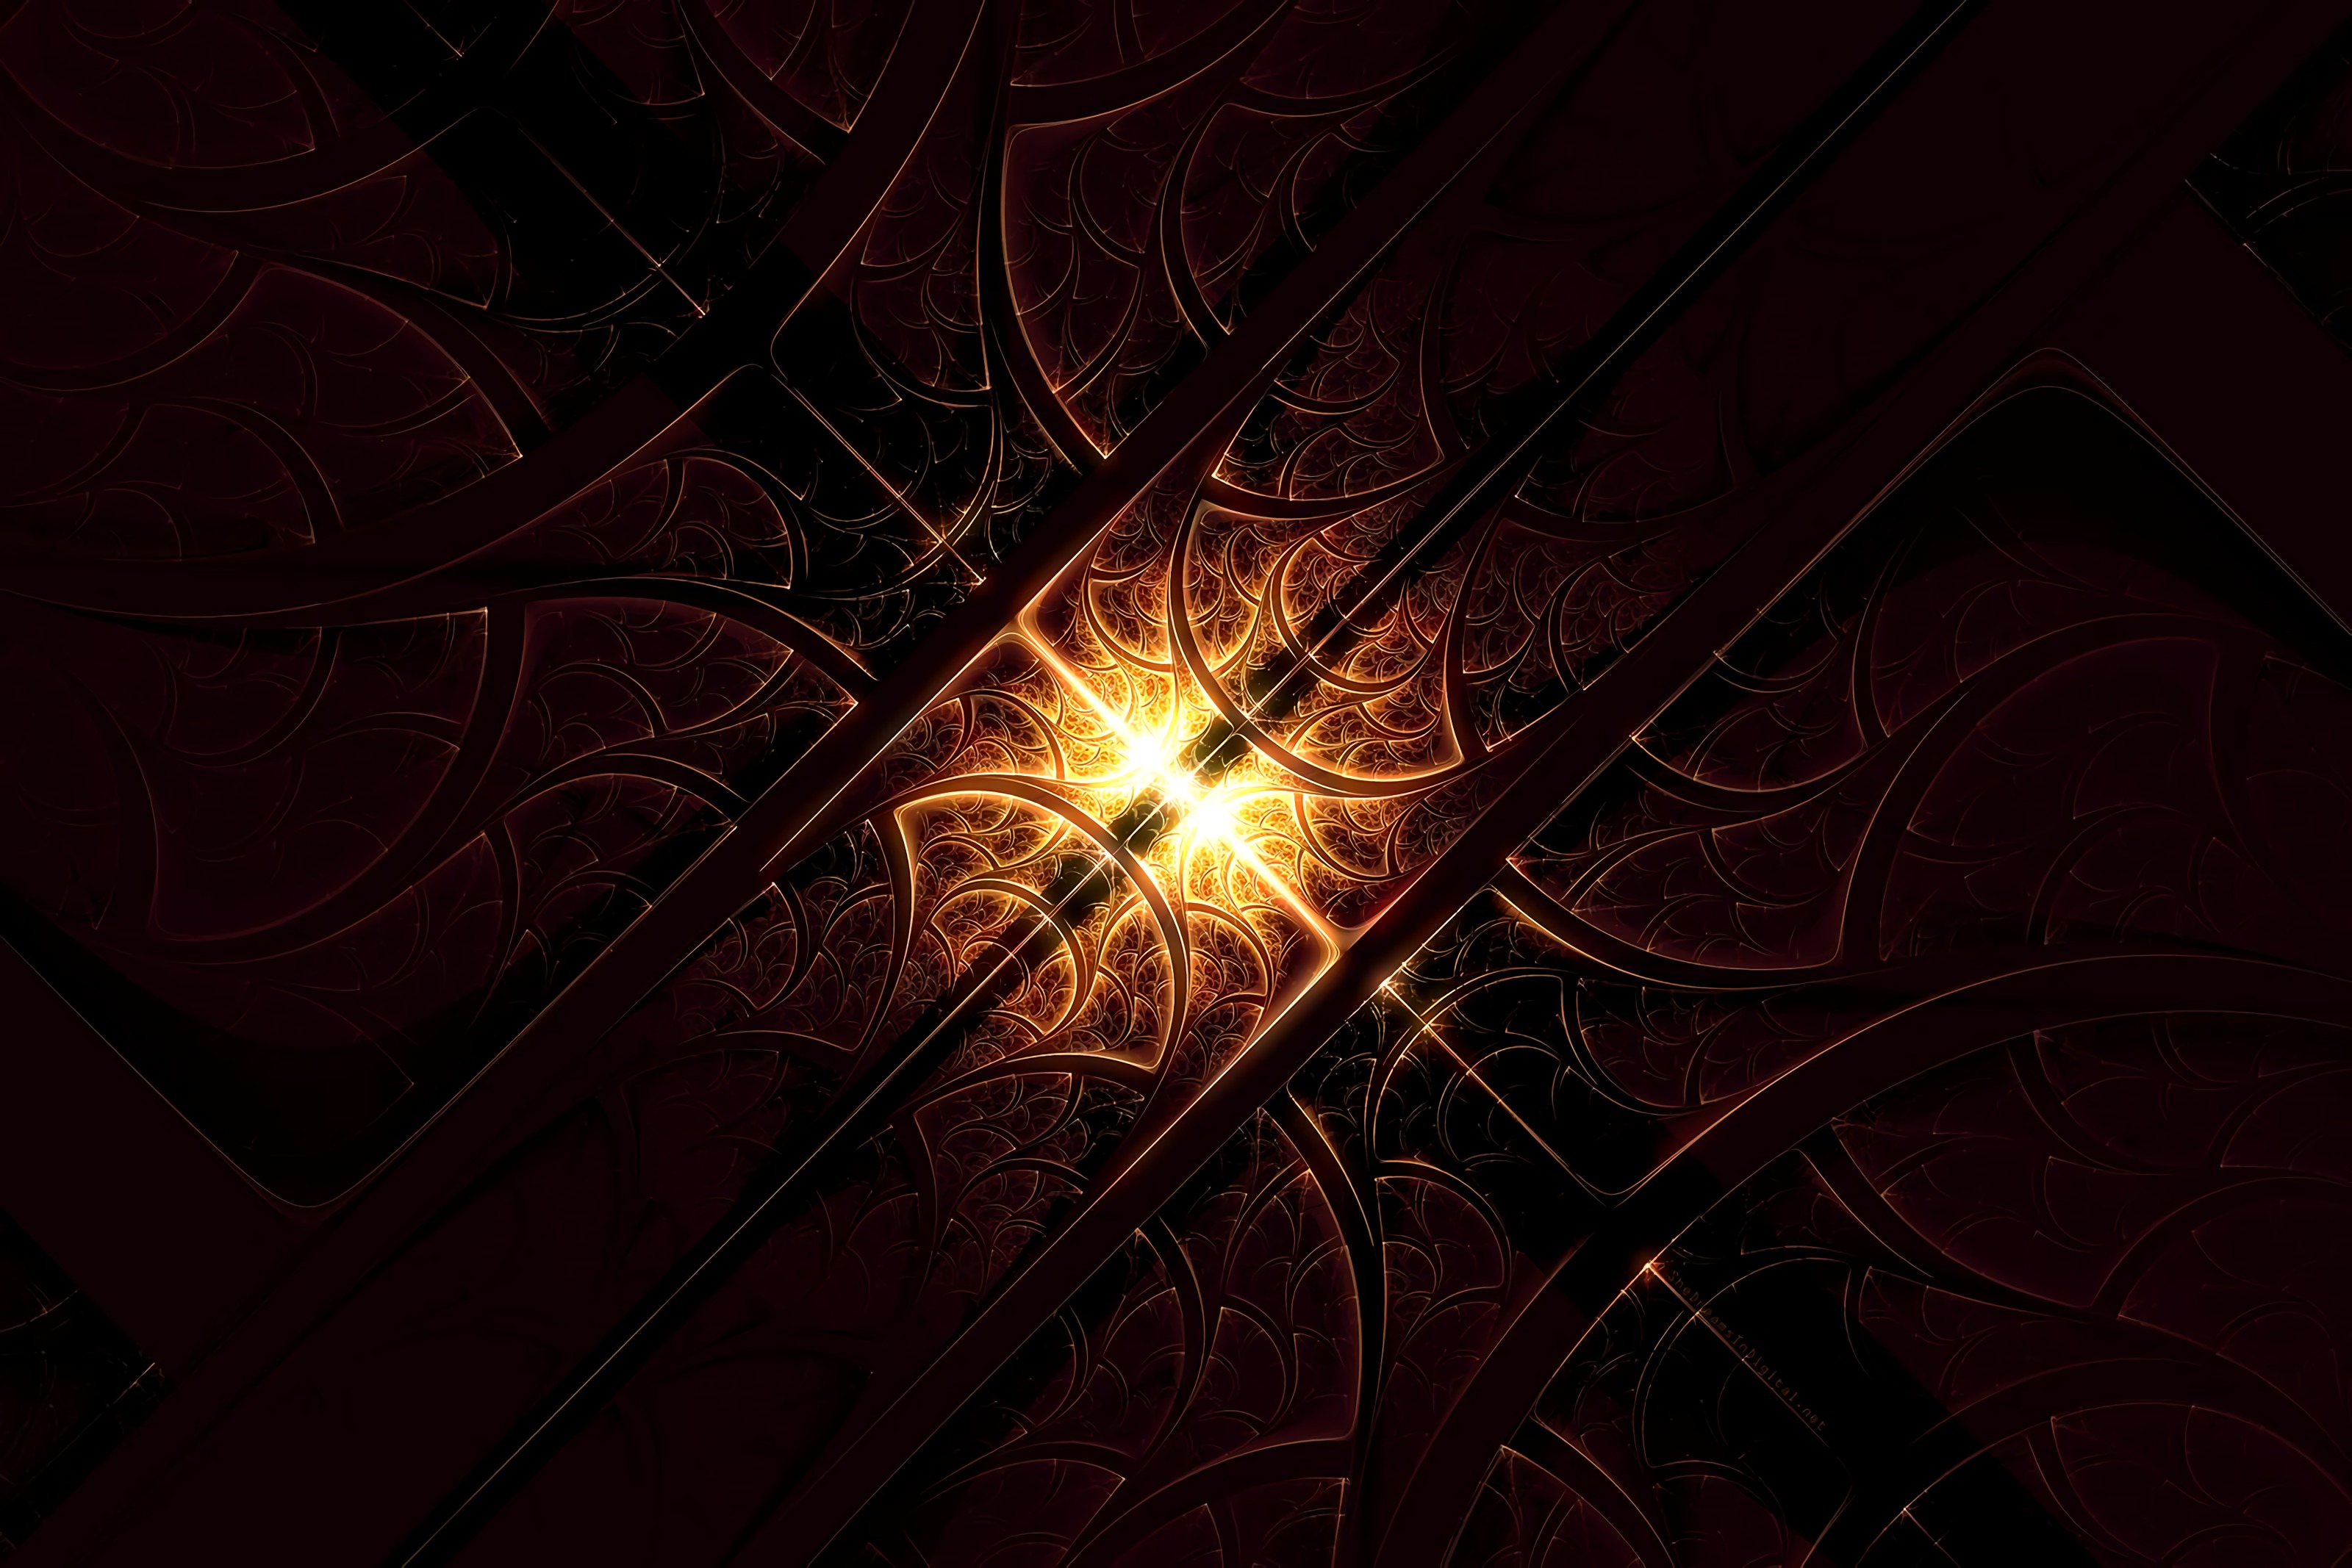 pattern, confused, intricate, abstract, fractal, glow